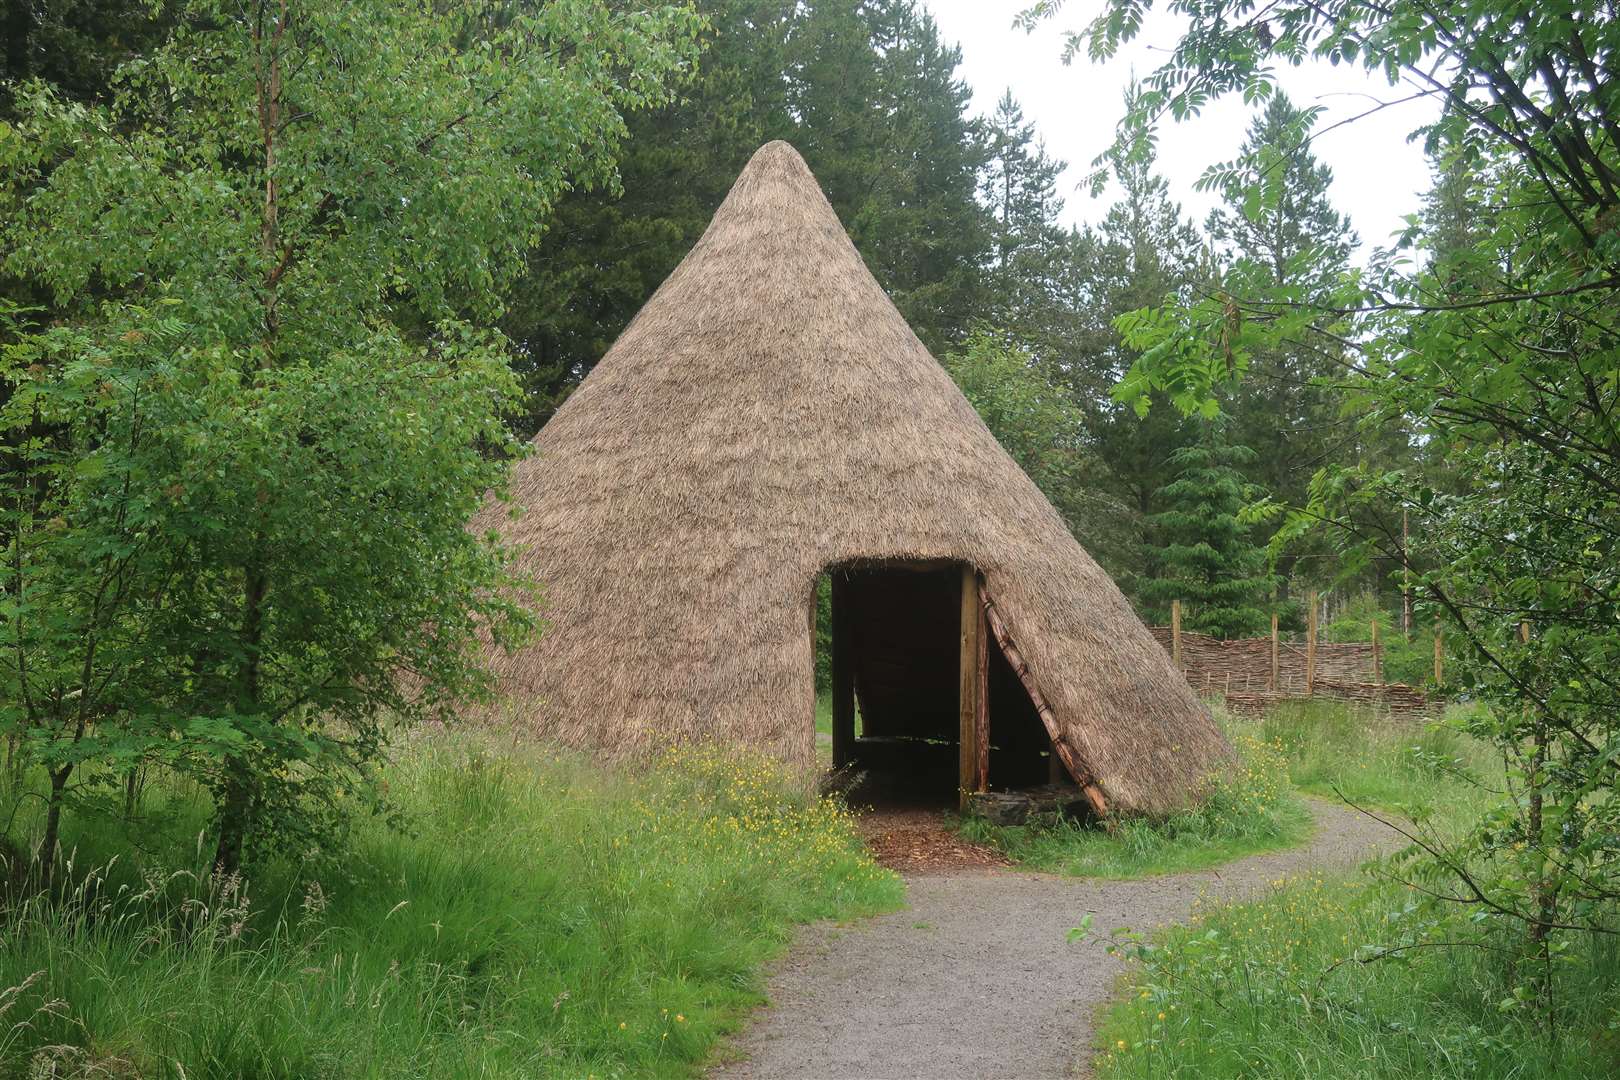 The rebuilt round house.